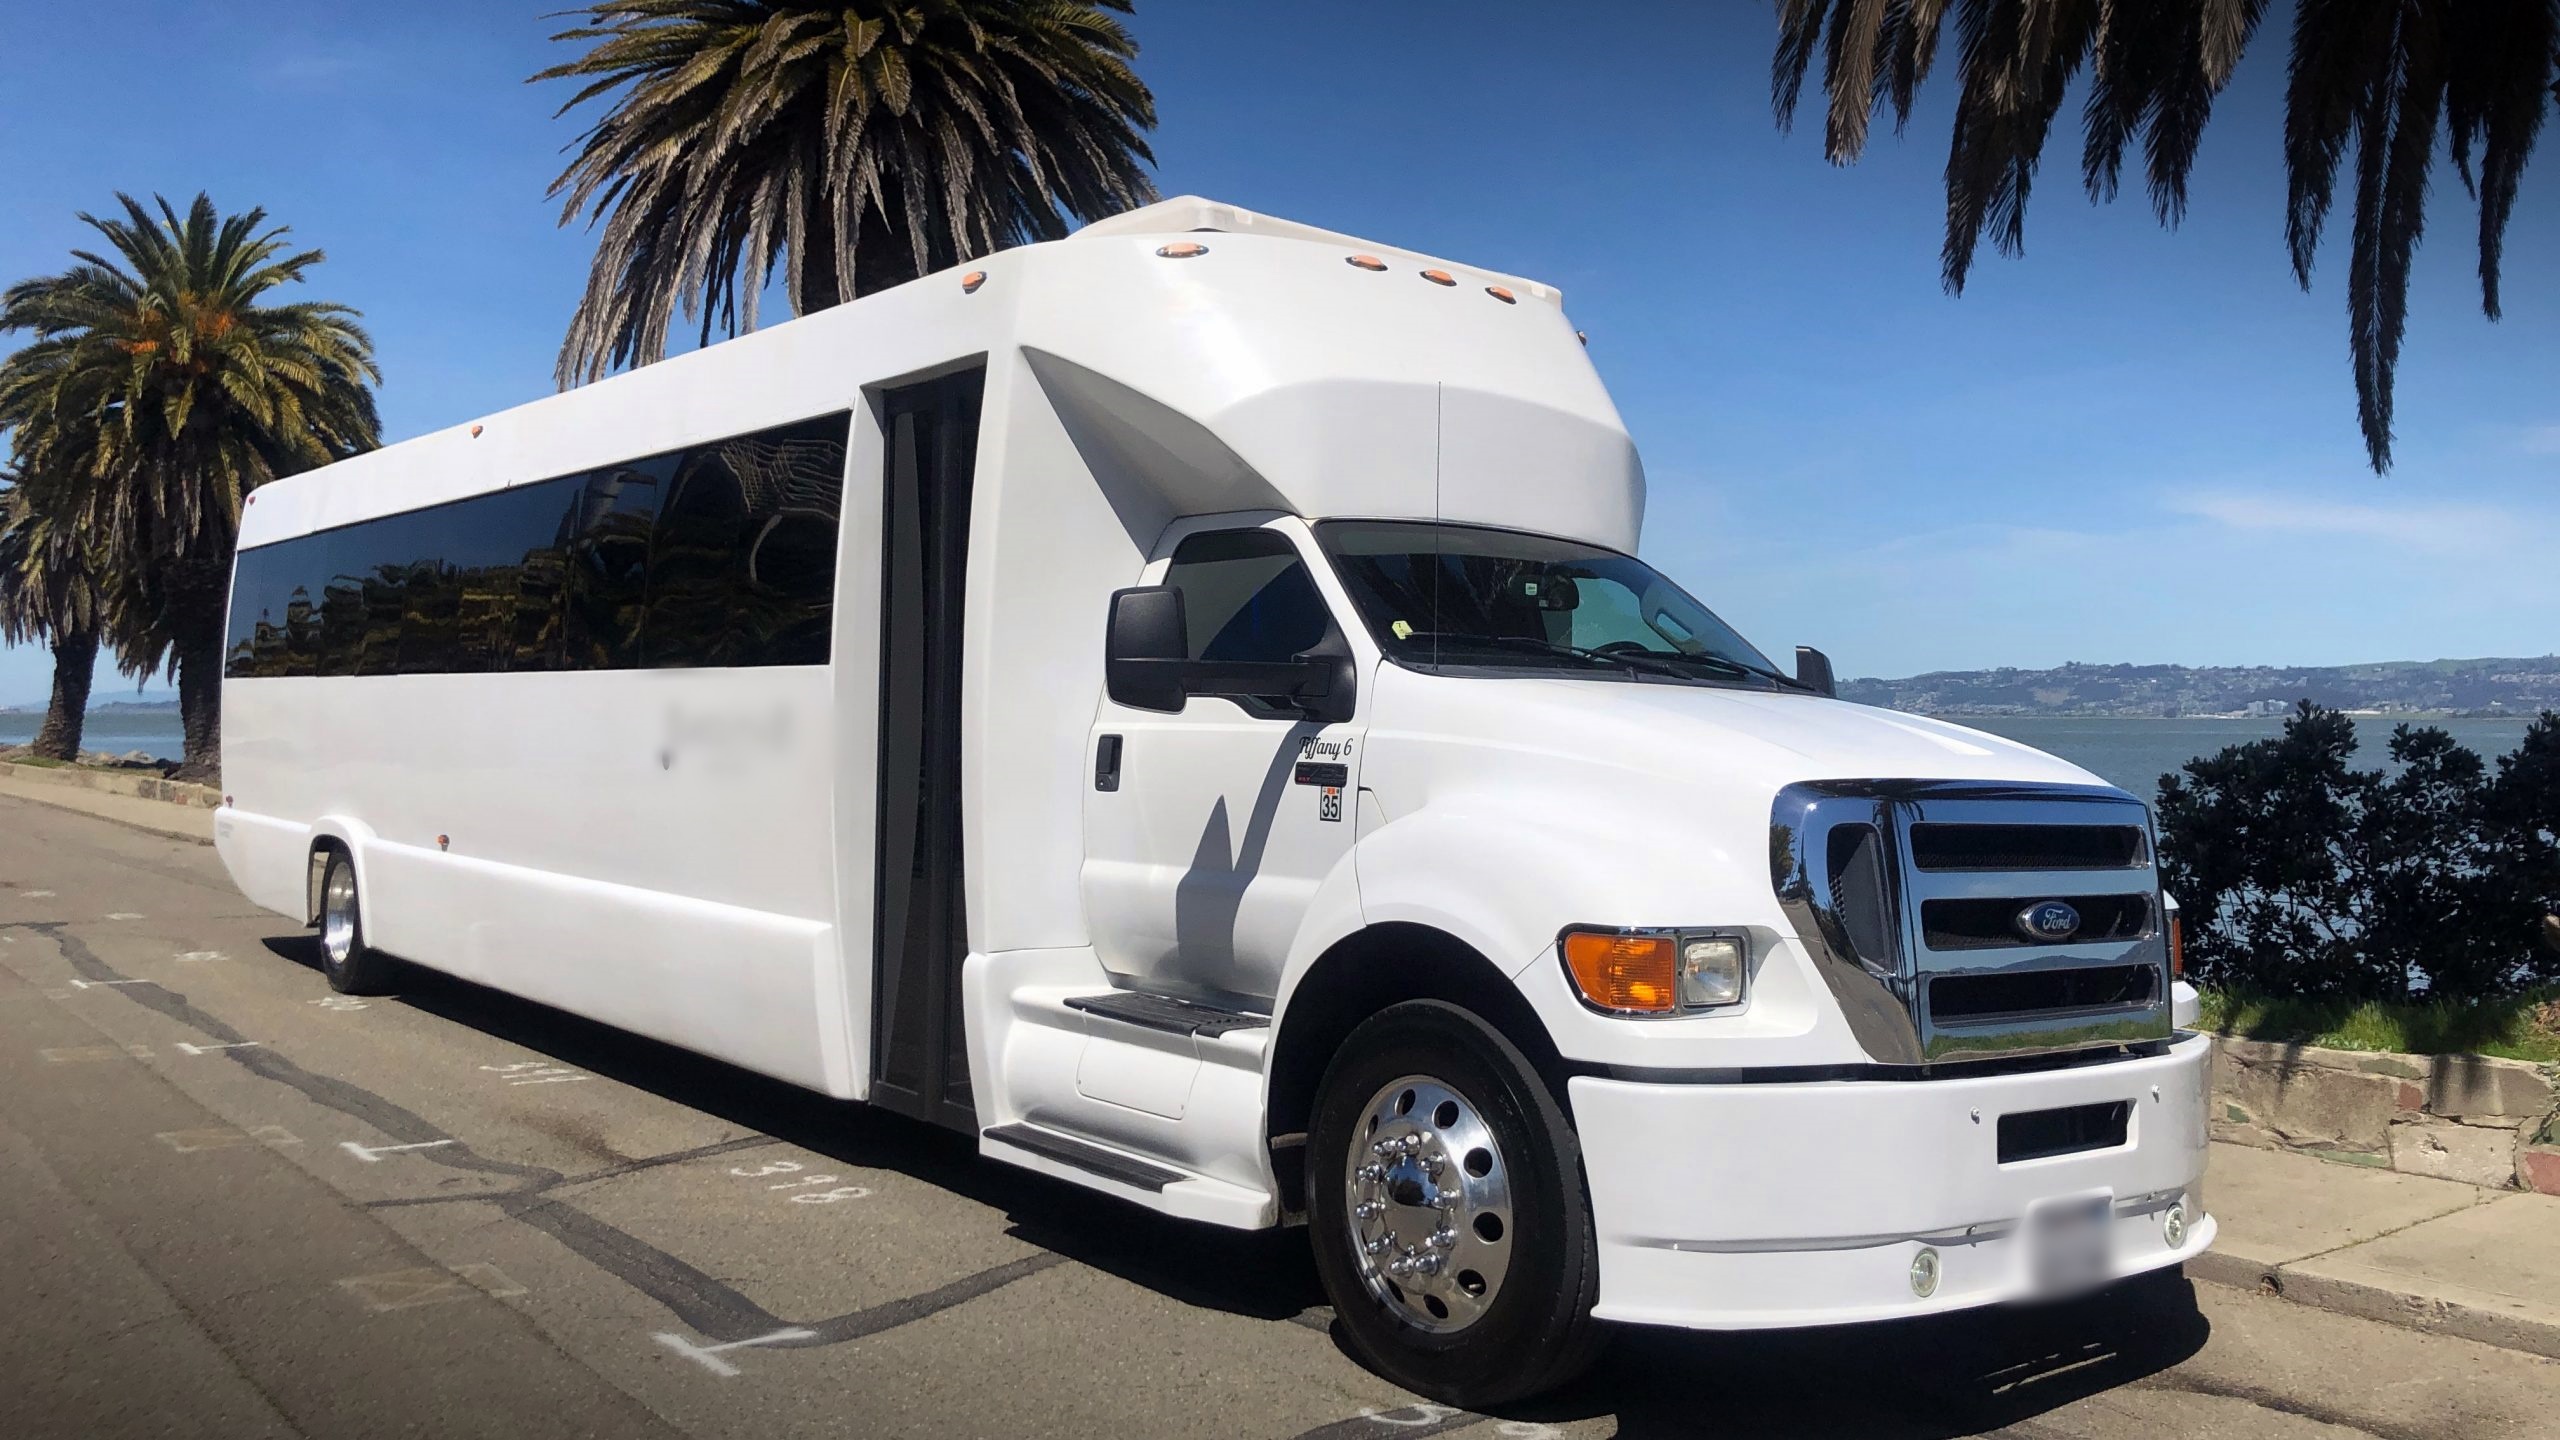 Explore NYC Together: Experience Our Fantastic Limo Bus for Group Travel